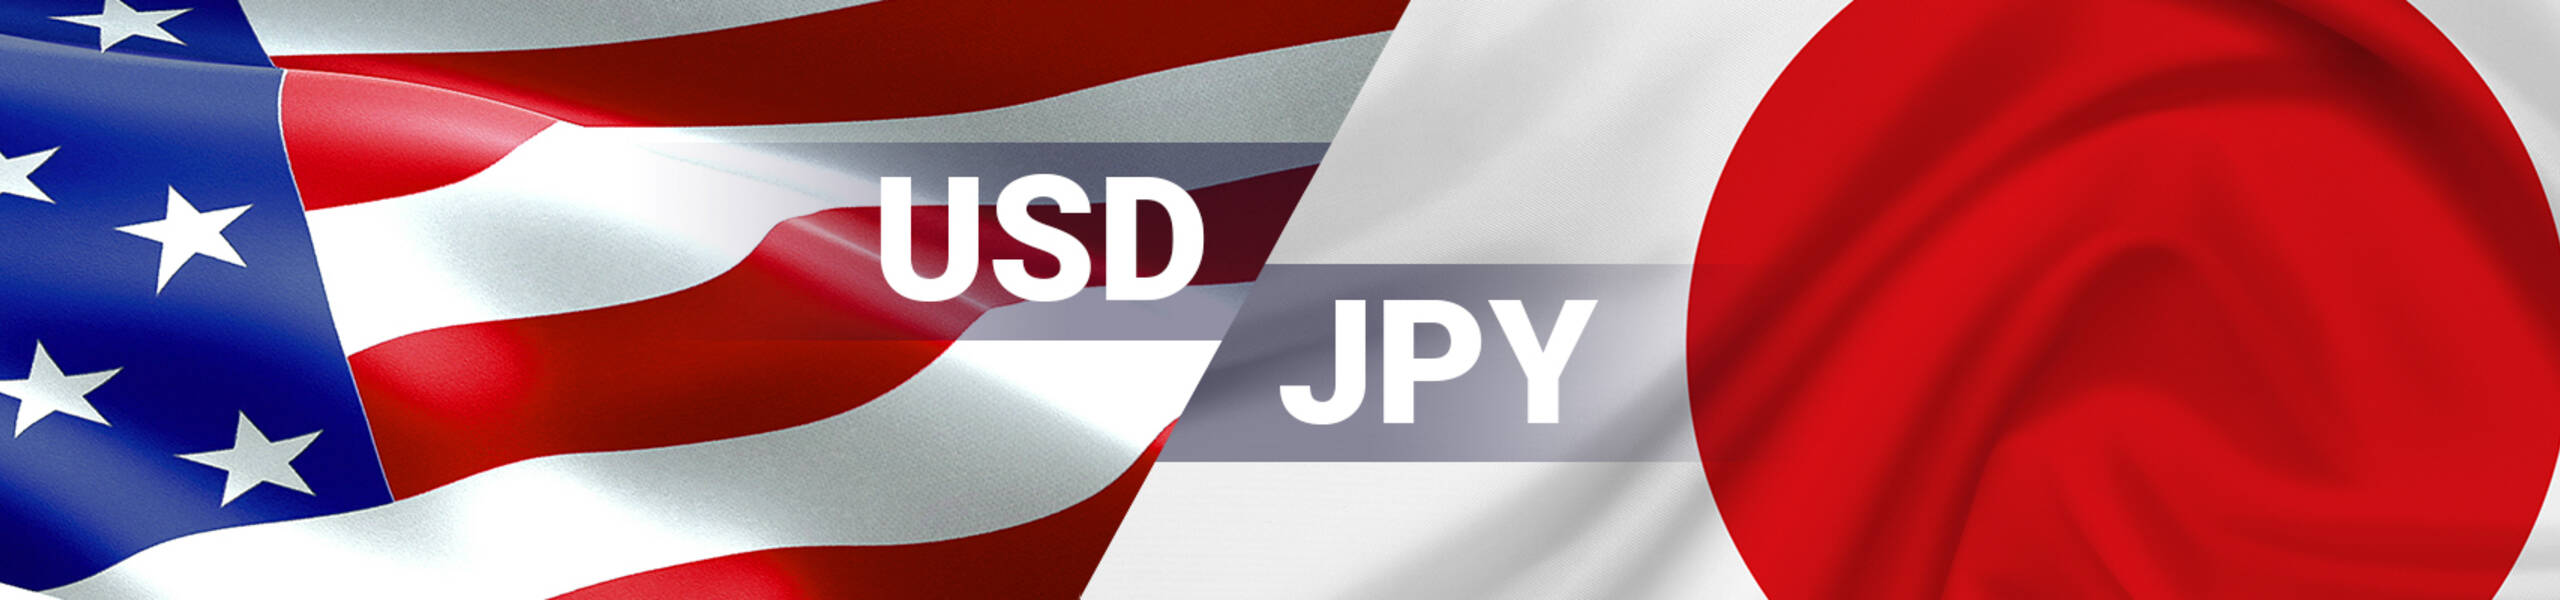 USD/JPY: Dollar made new local lows